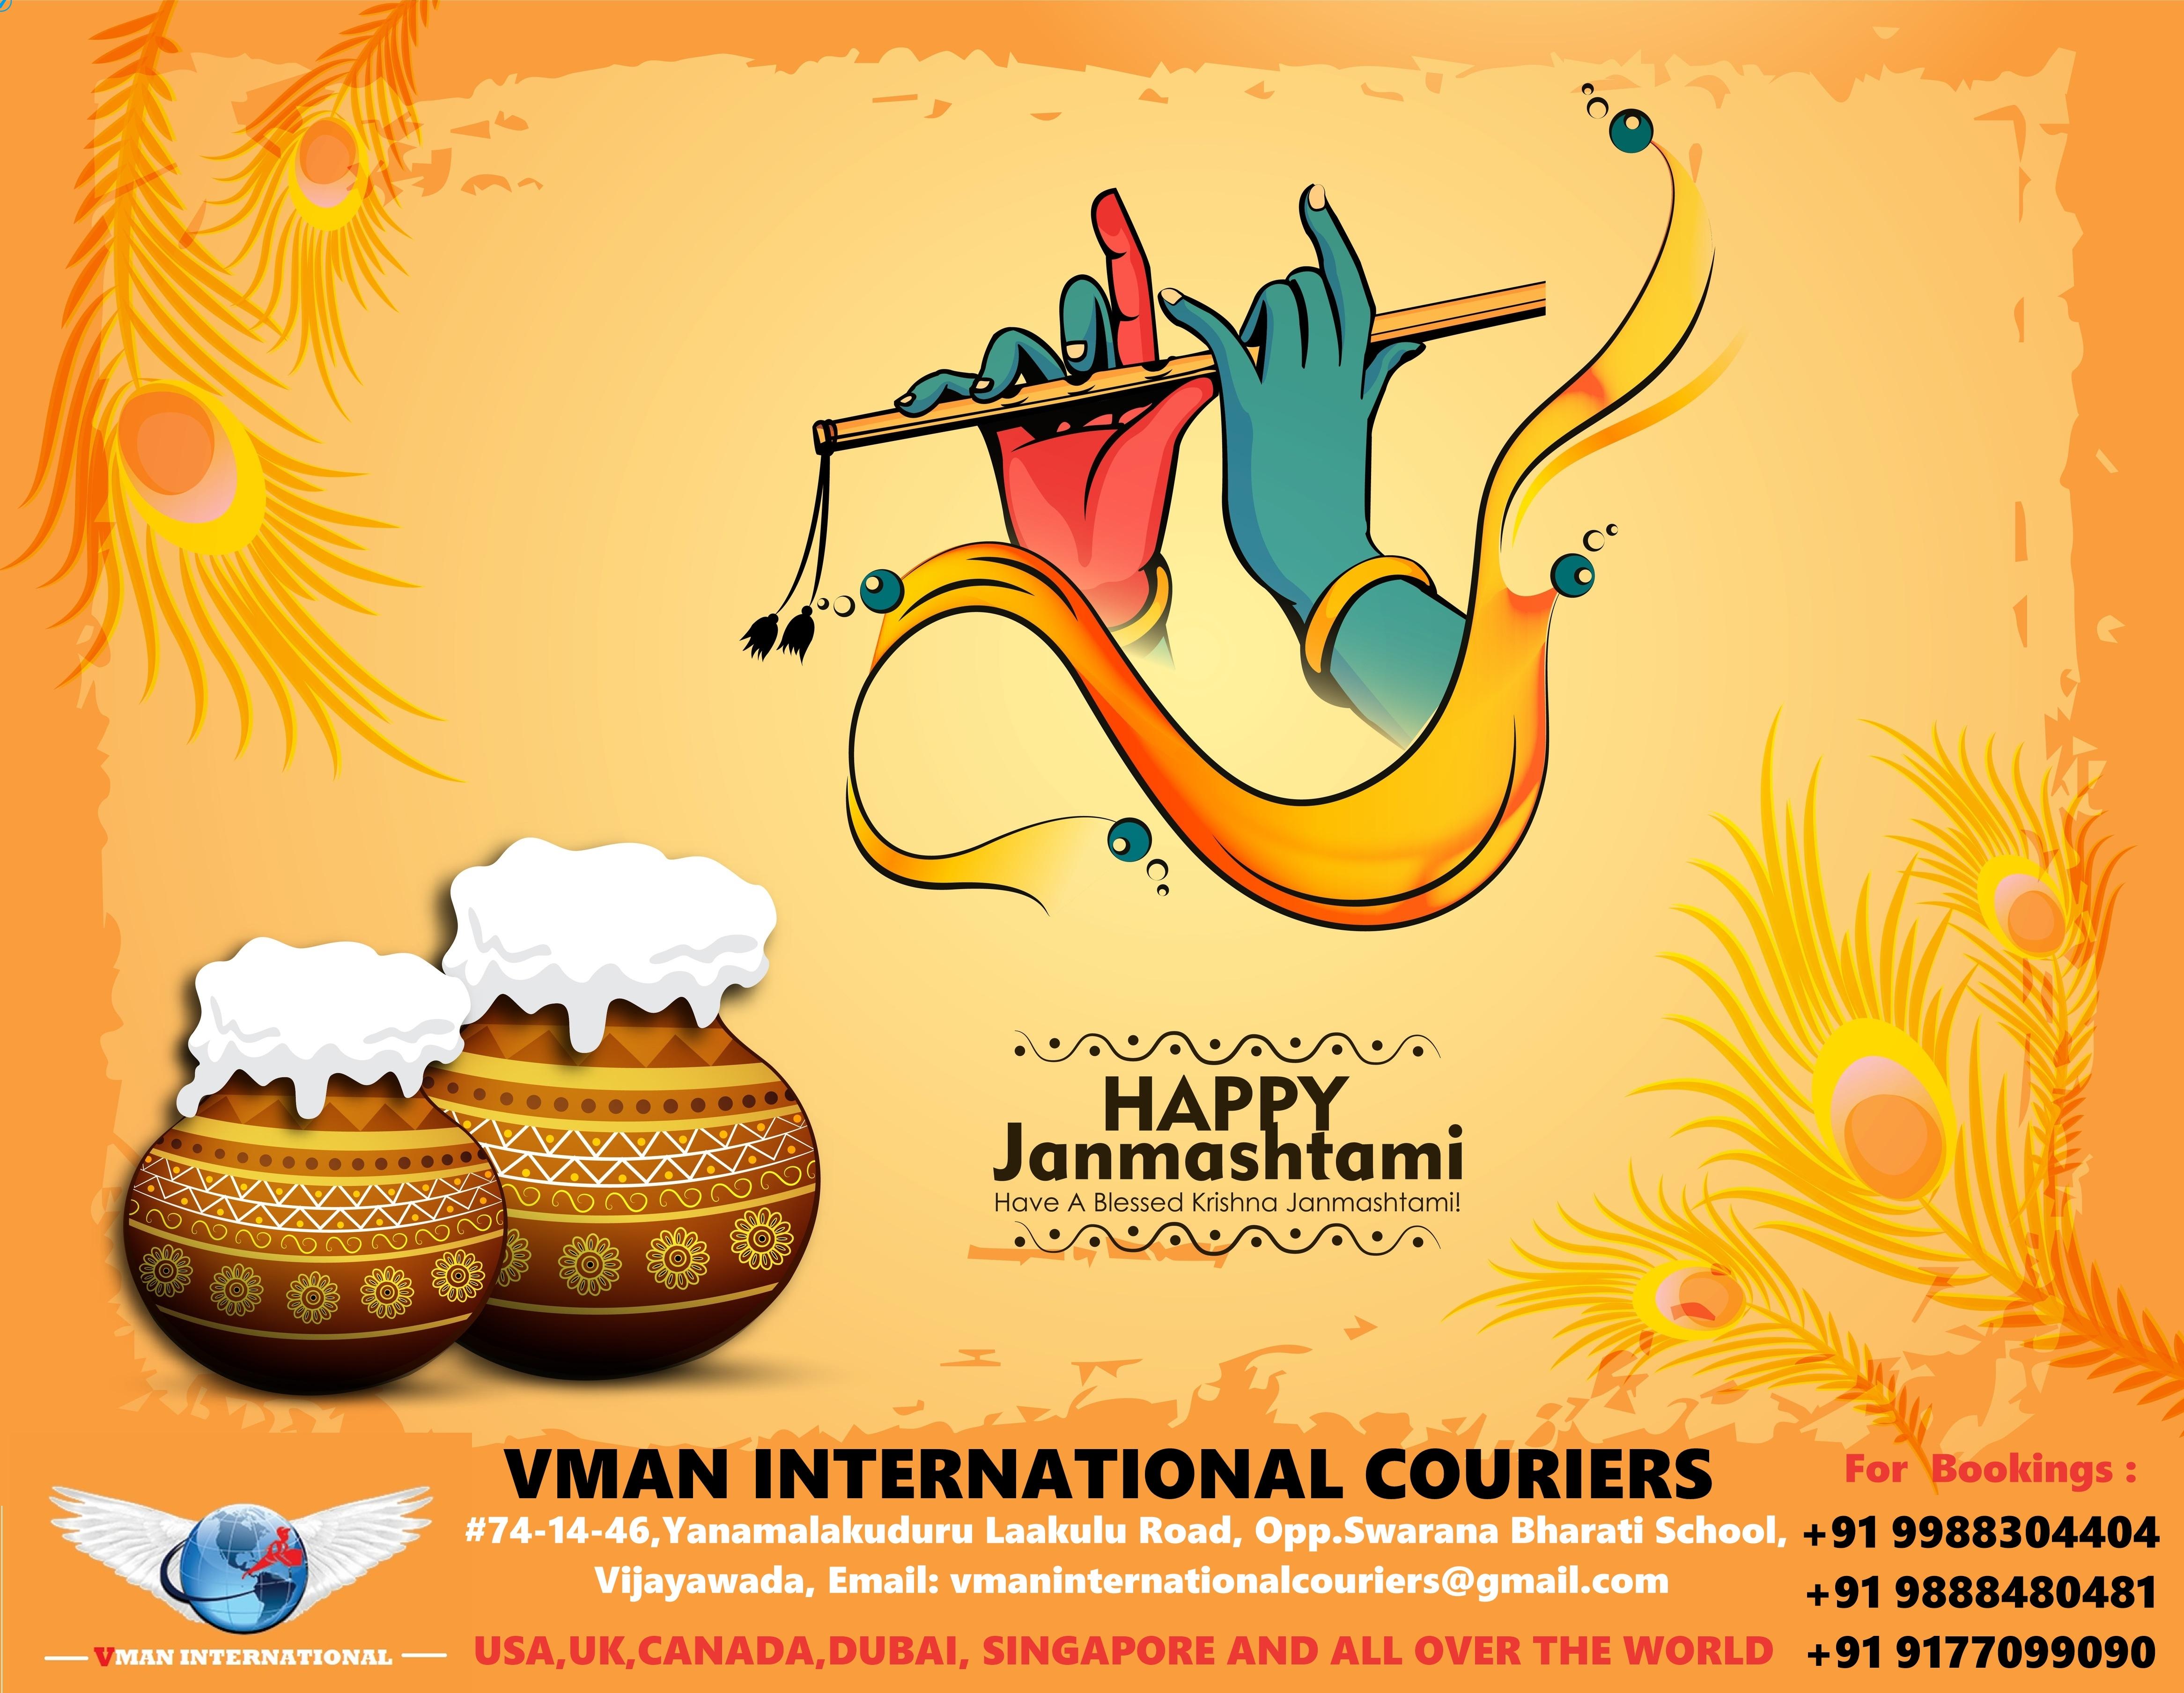 vmaninternationalcouriers - I hope Lord Krishna fills your and your...